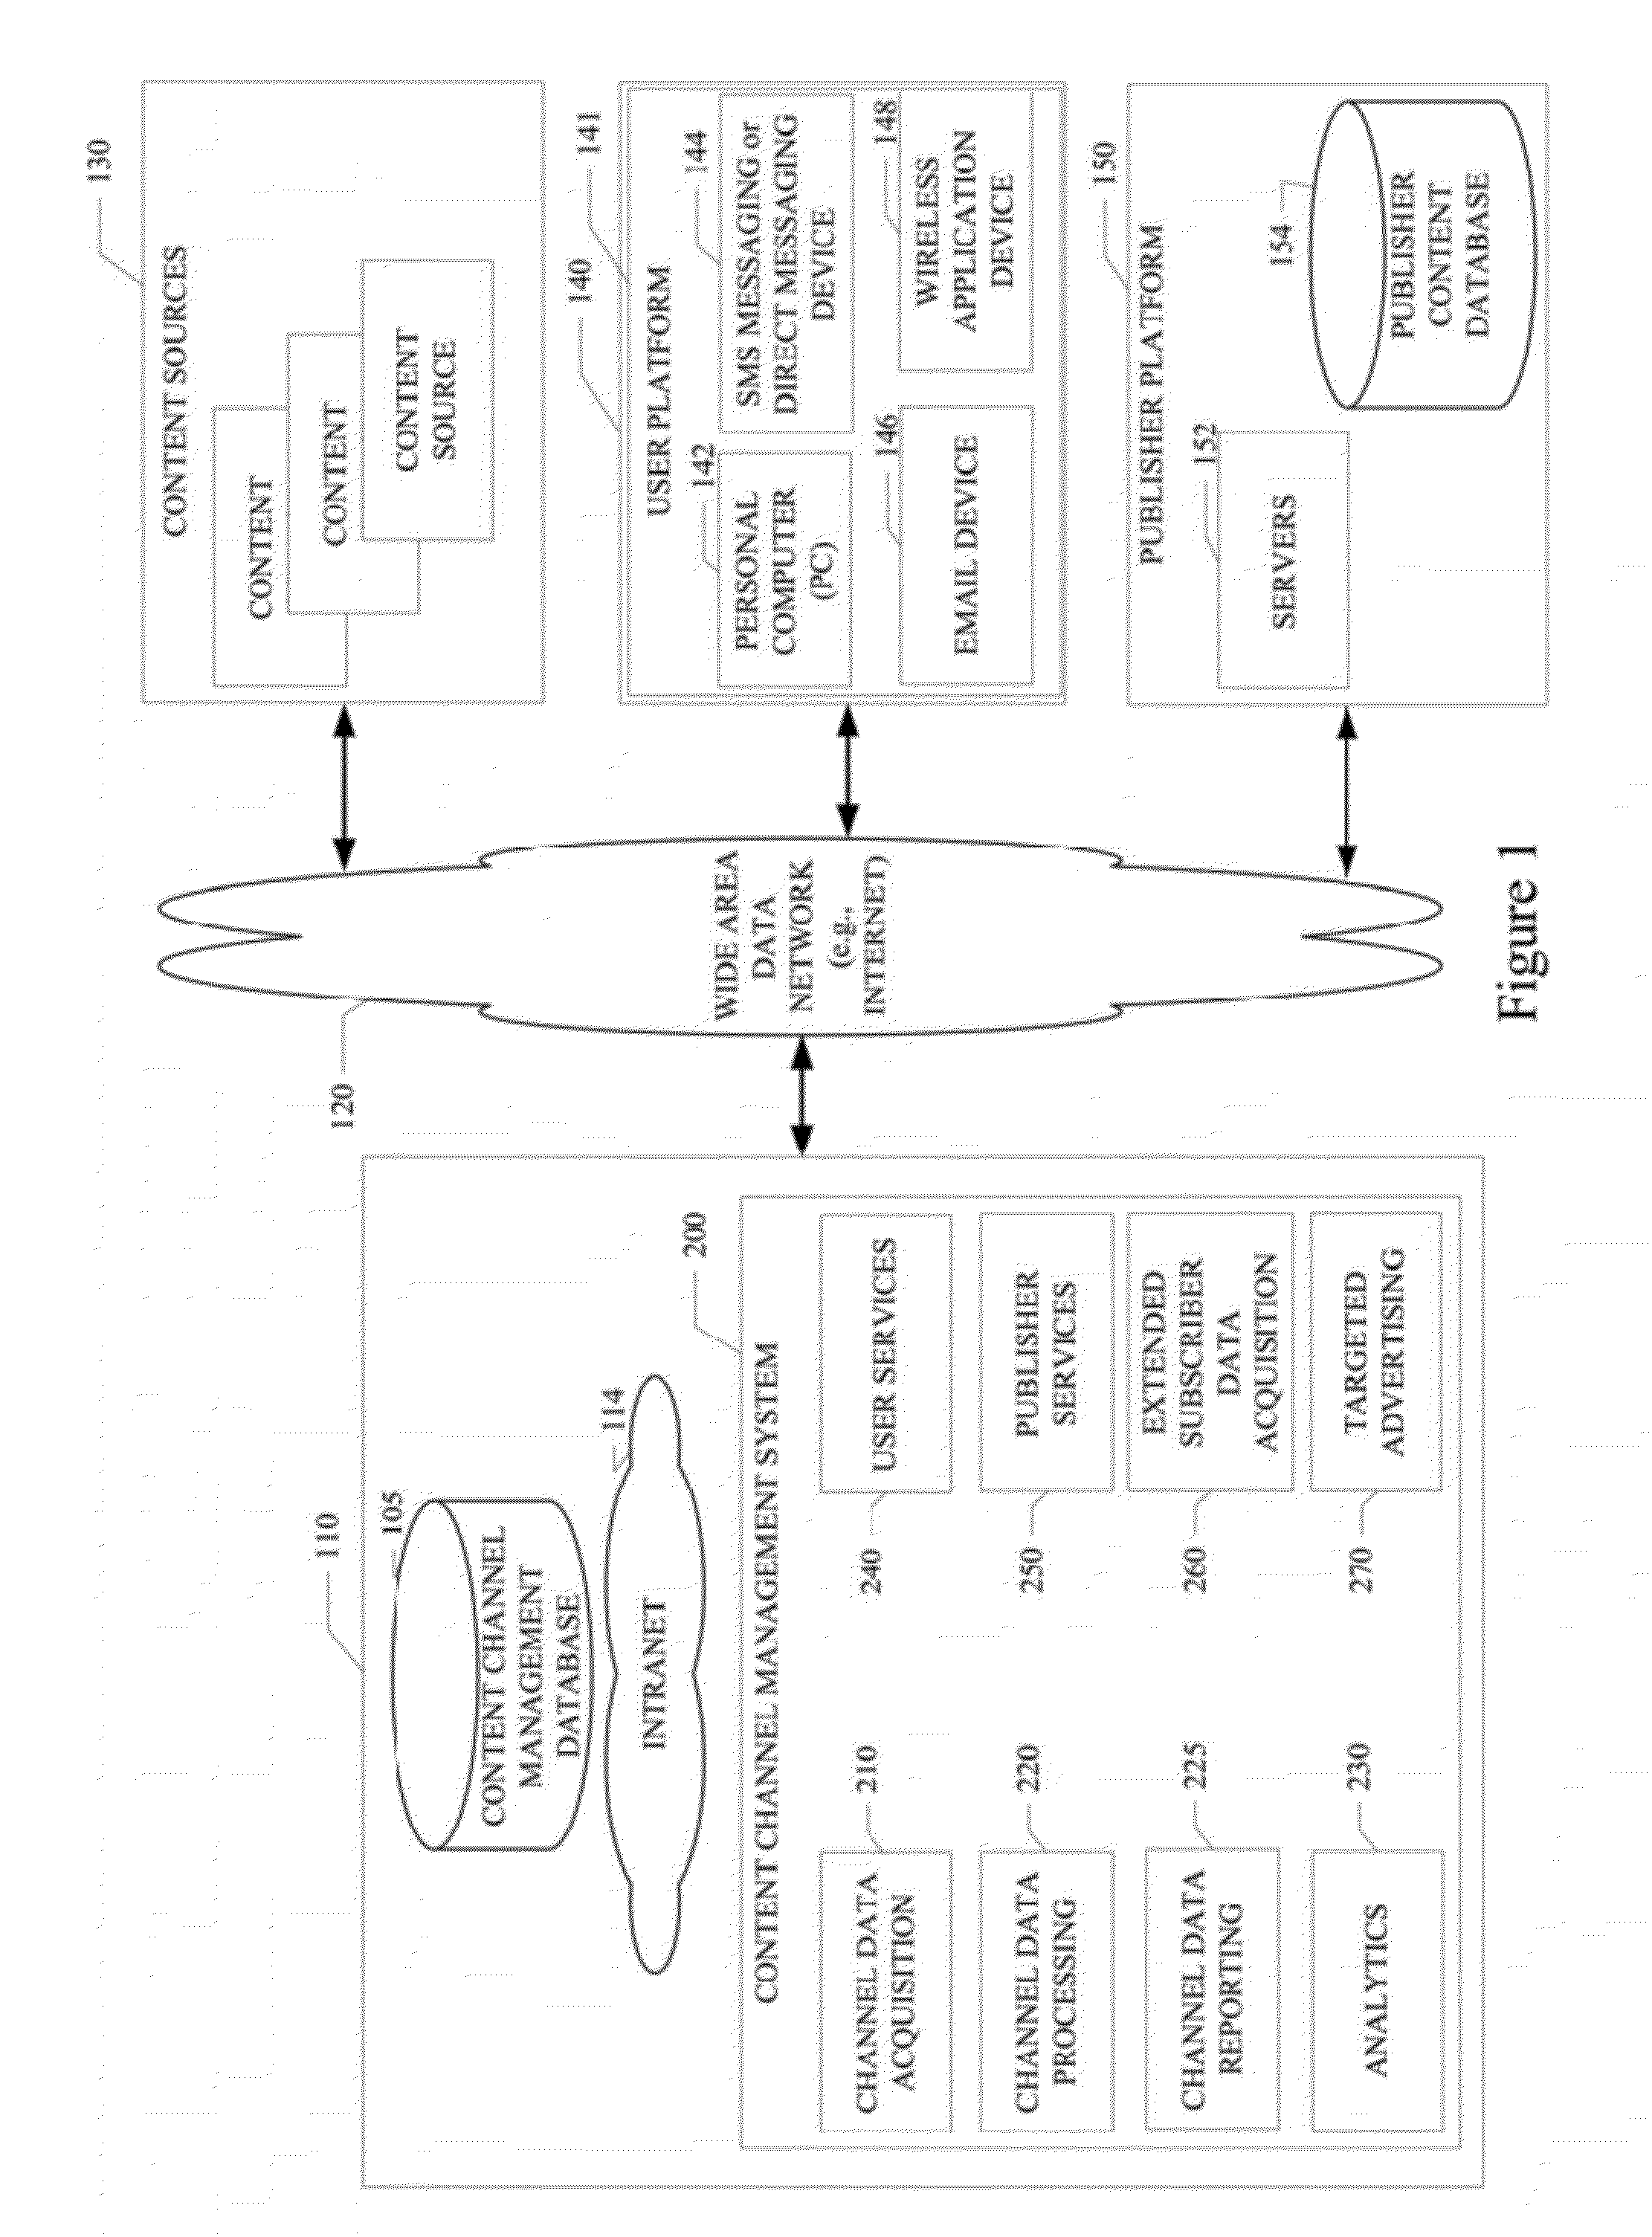 System and method for managing multiple content channels and engagement scoring